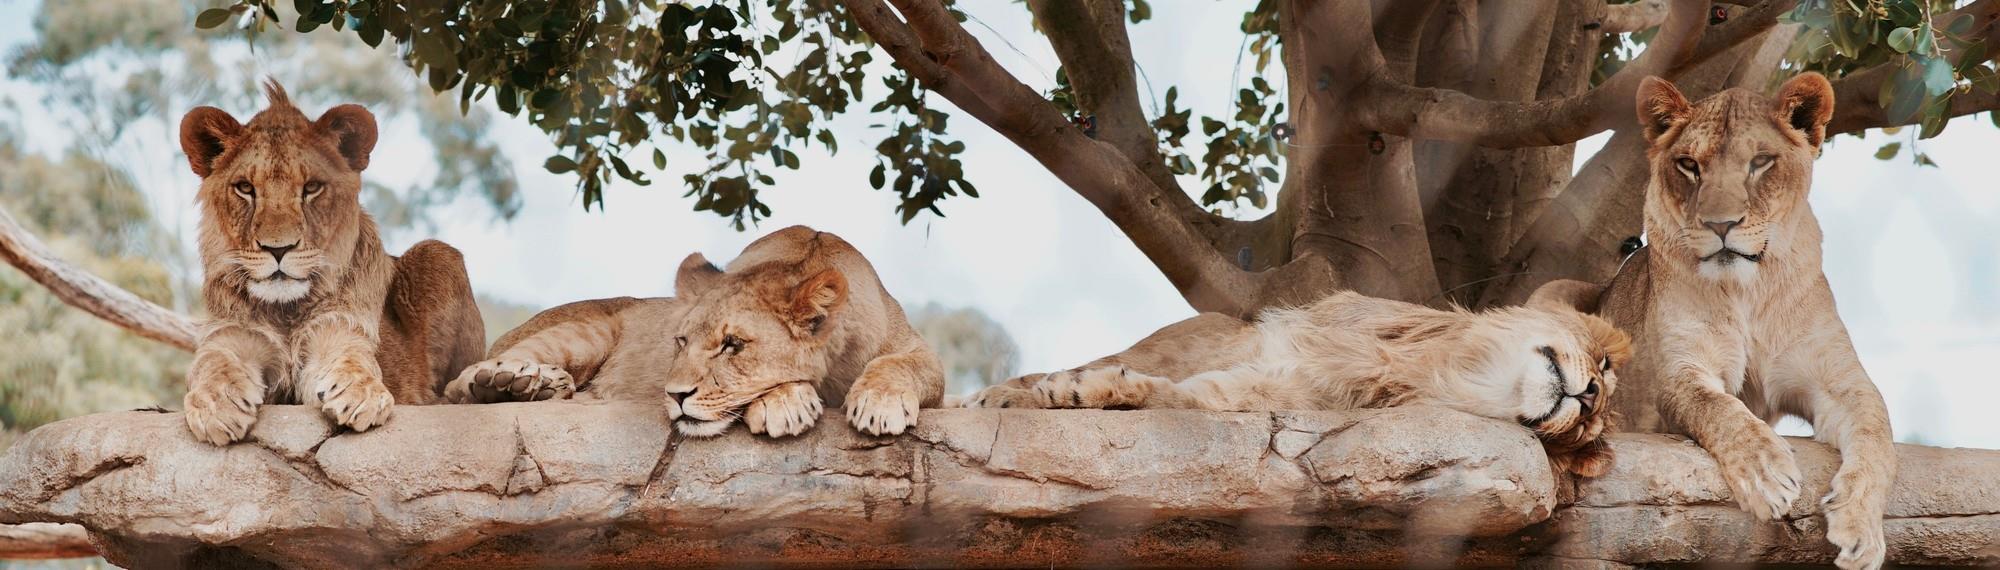 Four lion siblings relaxing on a rock under the shade of a big tree